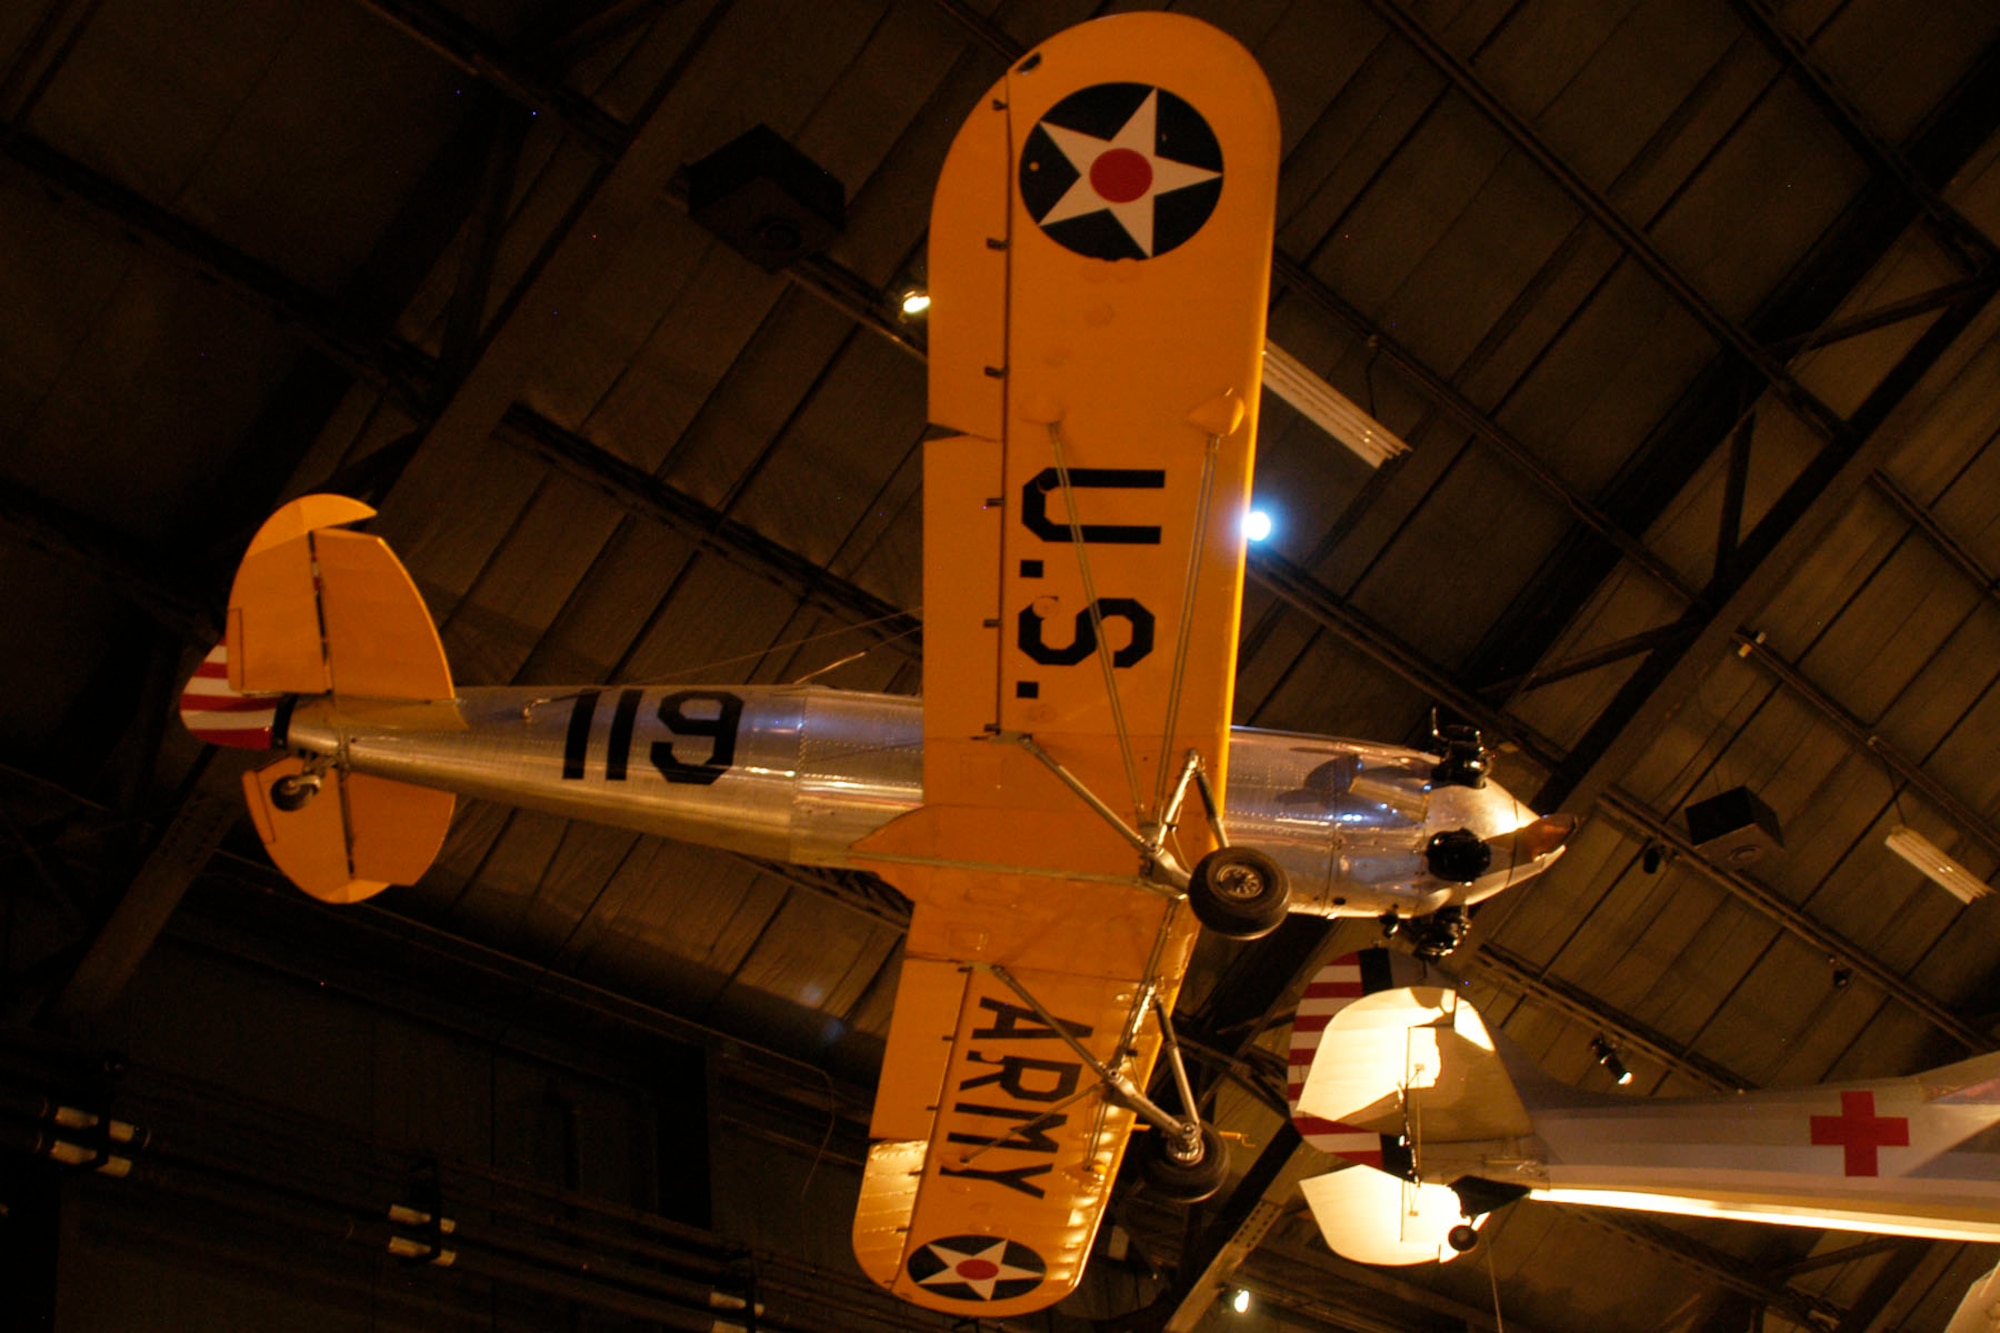 DAYTON, Ohio -- Ryan PT-22 Recruit in the World War II Gallery at the National Museum of the United States Air Force. (U.S. Air Force photo)